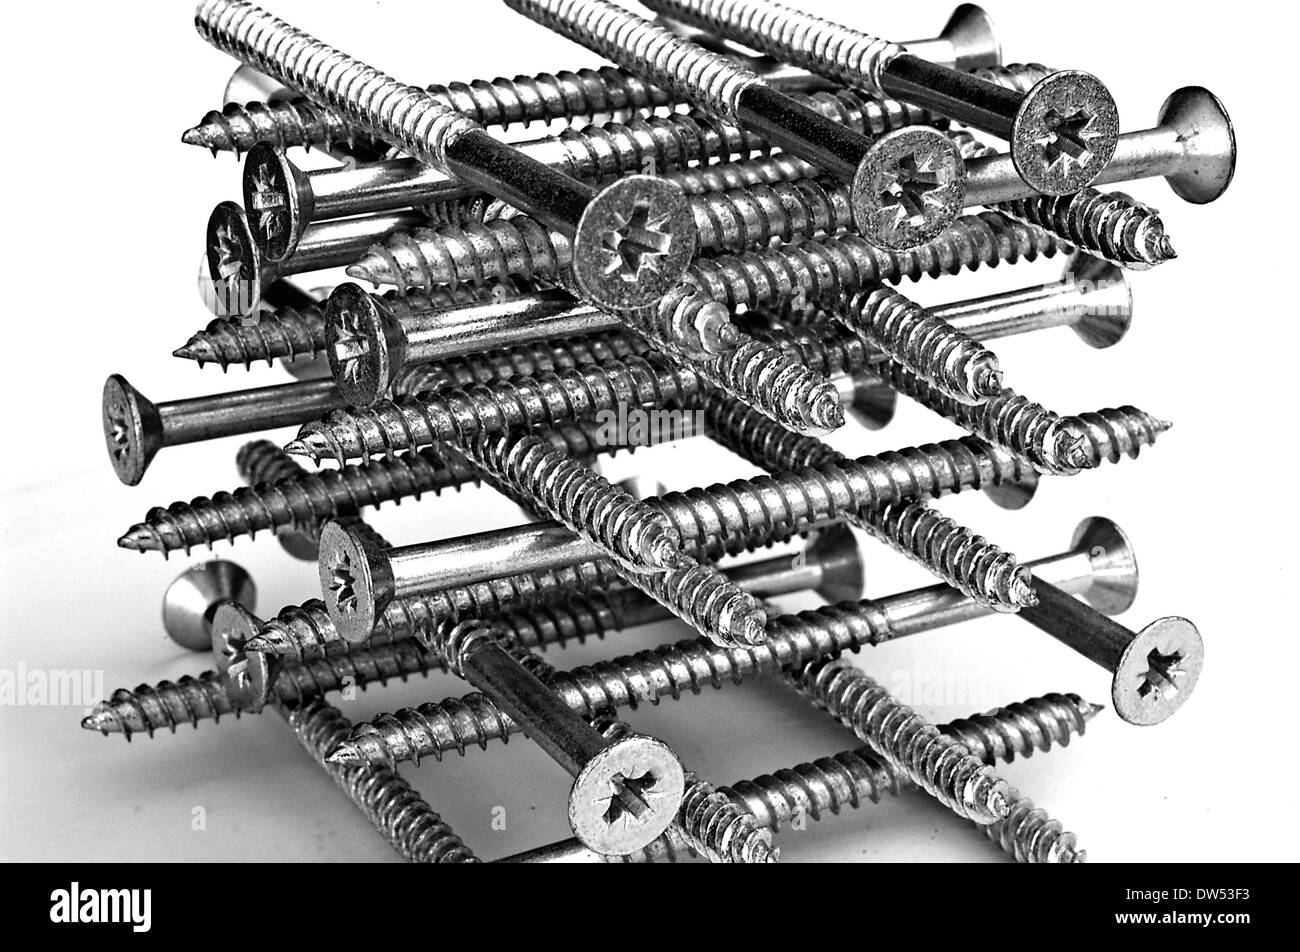 Abstract image of timber screws stacked into a pile Stock Photo